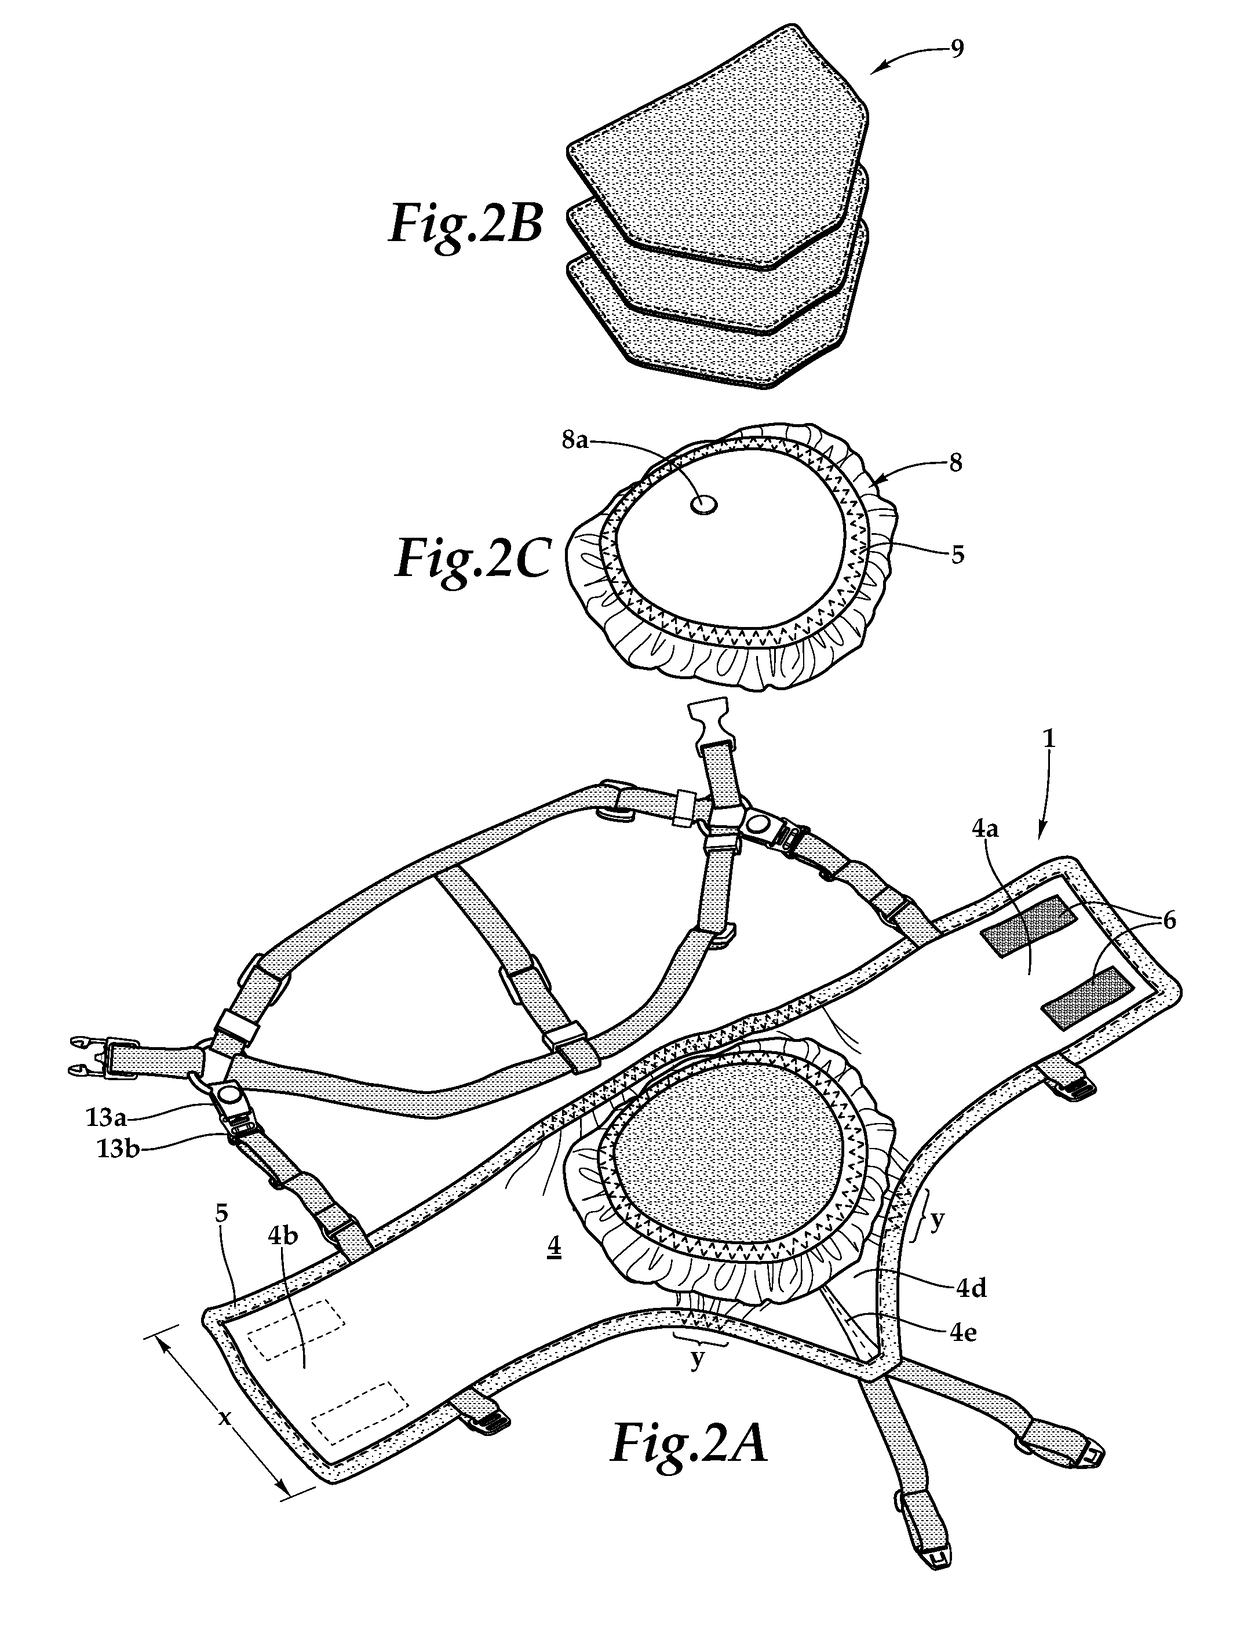 Urinary incontinence device for animals